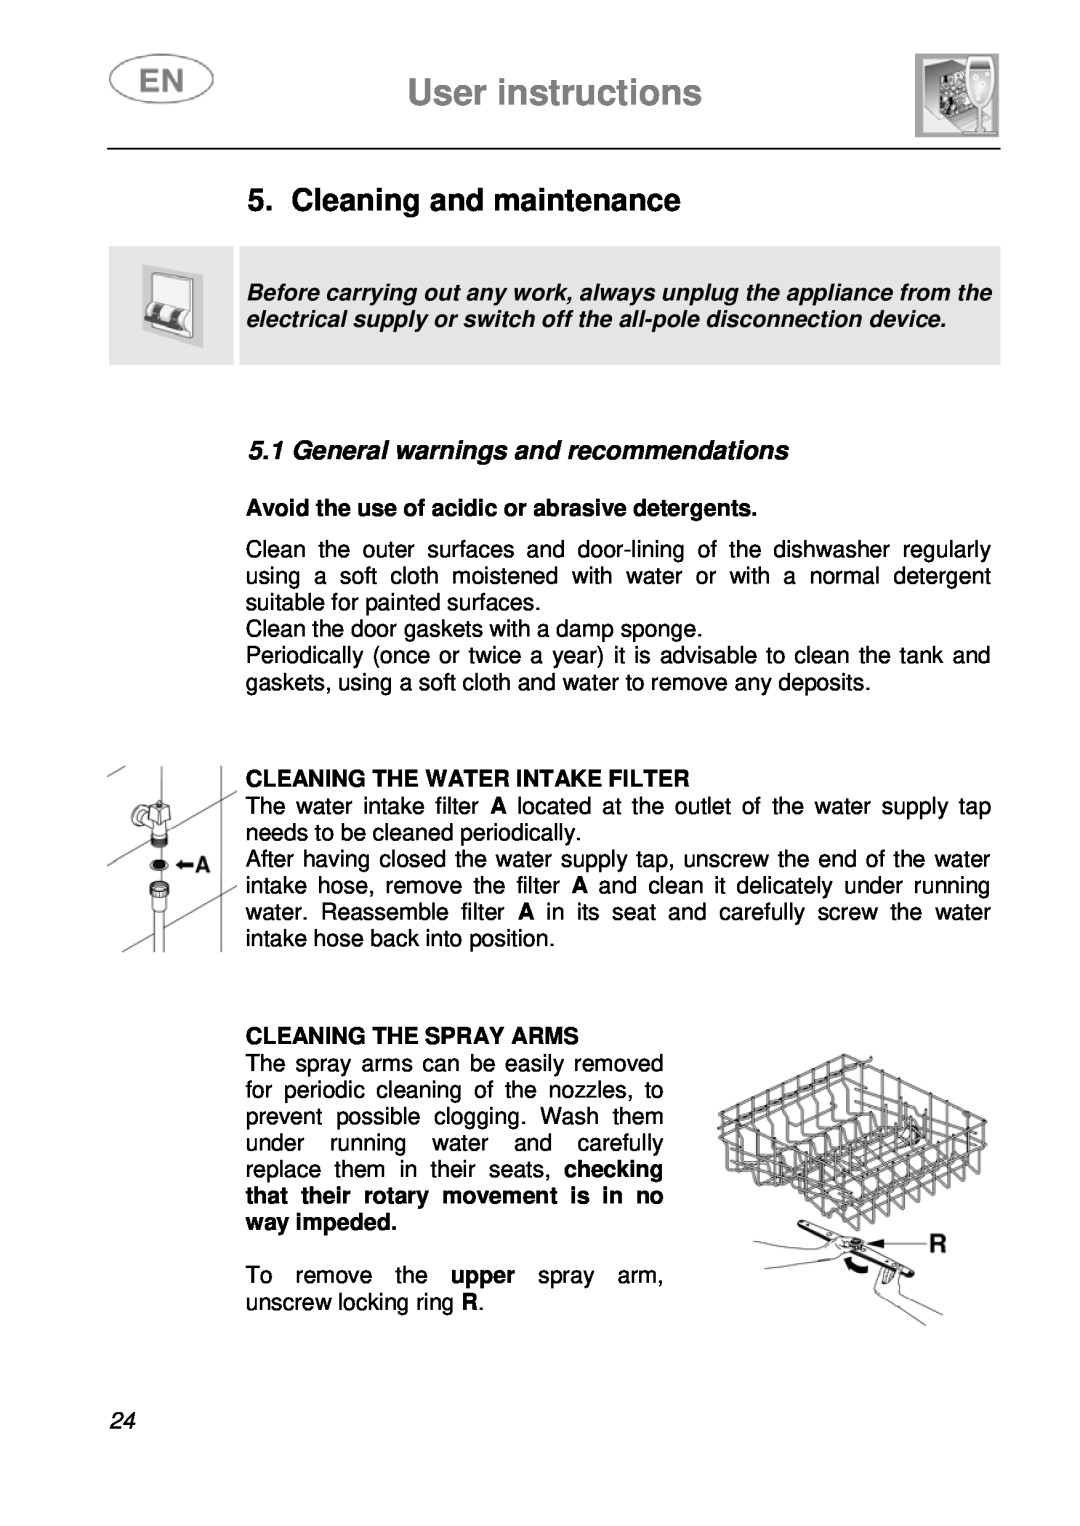 CDA WC460 manual Cleaning and maintenance, User instructions, General warnings and recommendations, Cleaning The Spray Arms 